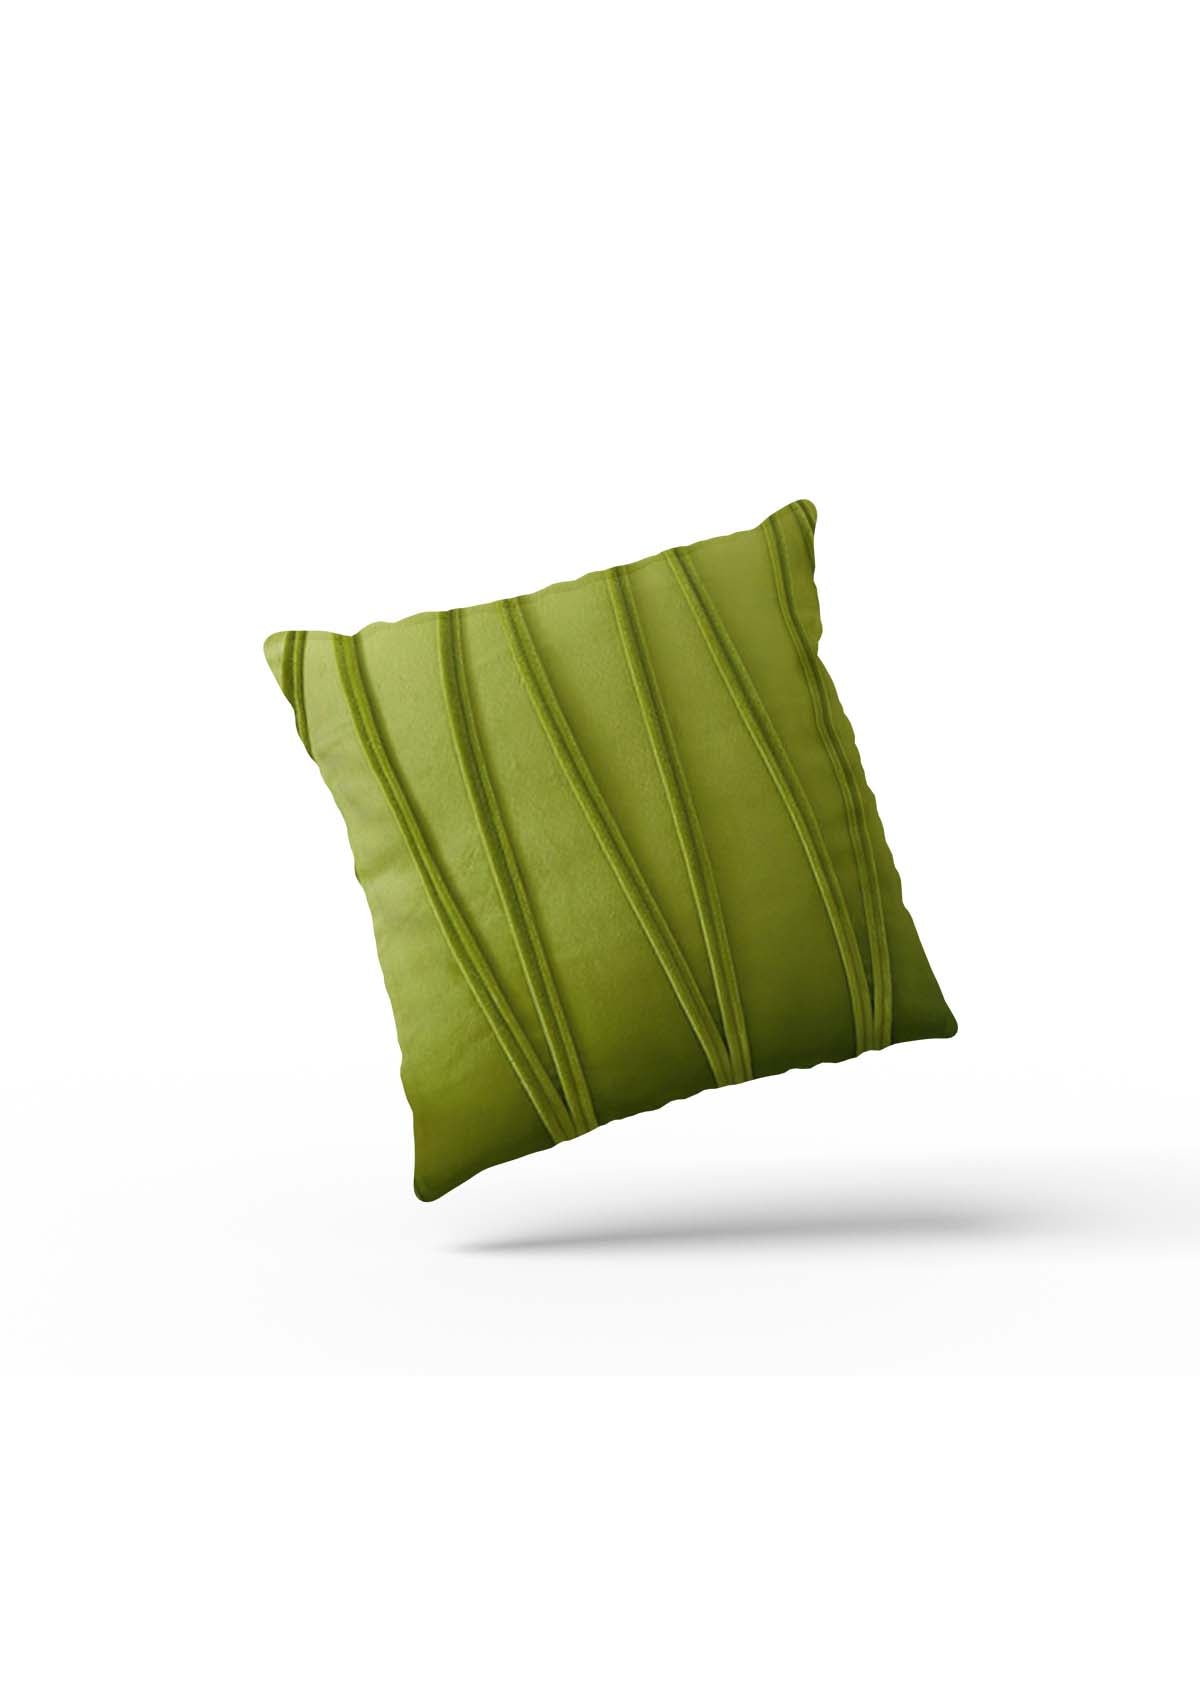  Olive Green Velvet Cushion Covers | CovermyCushion